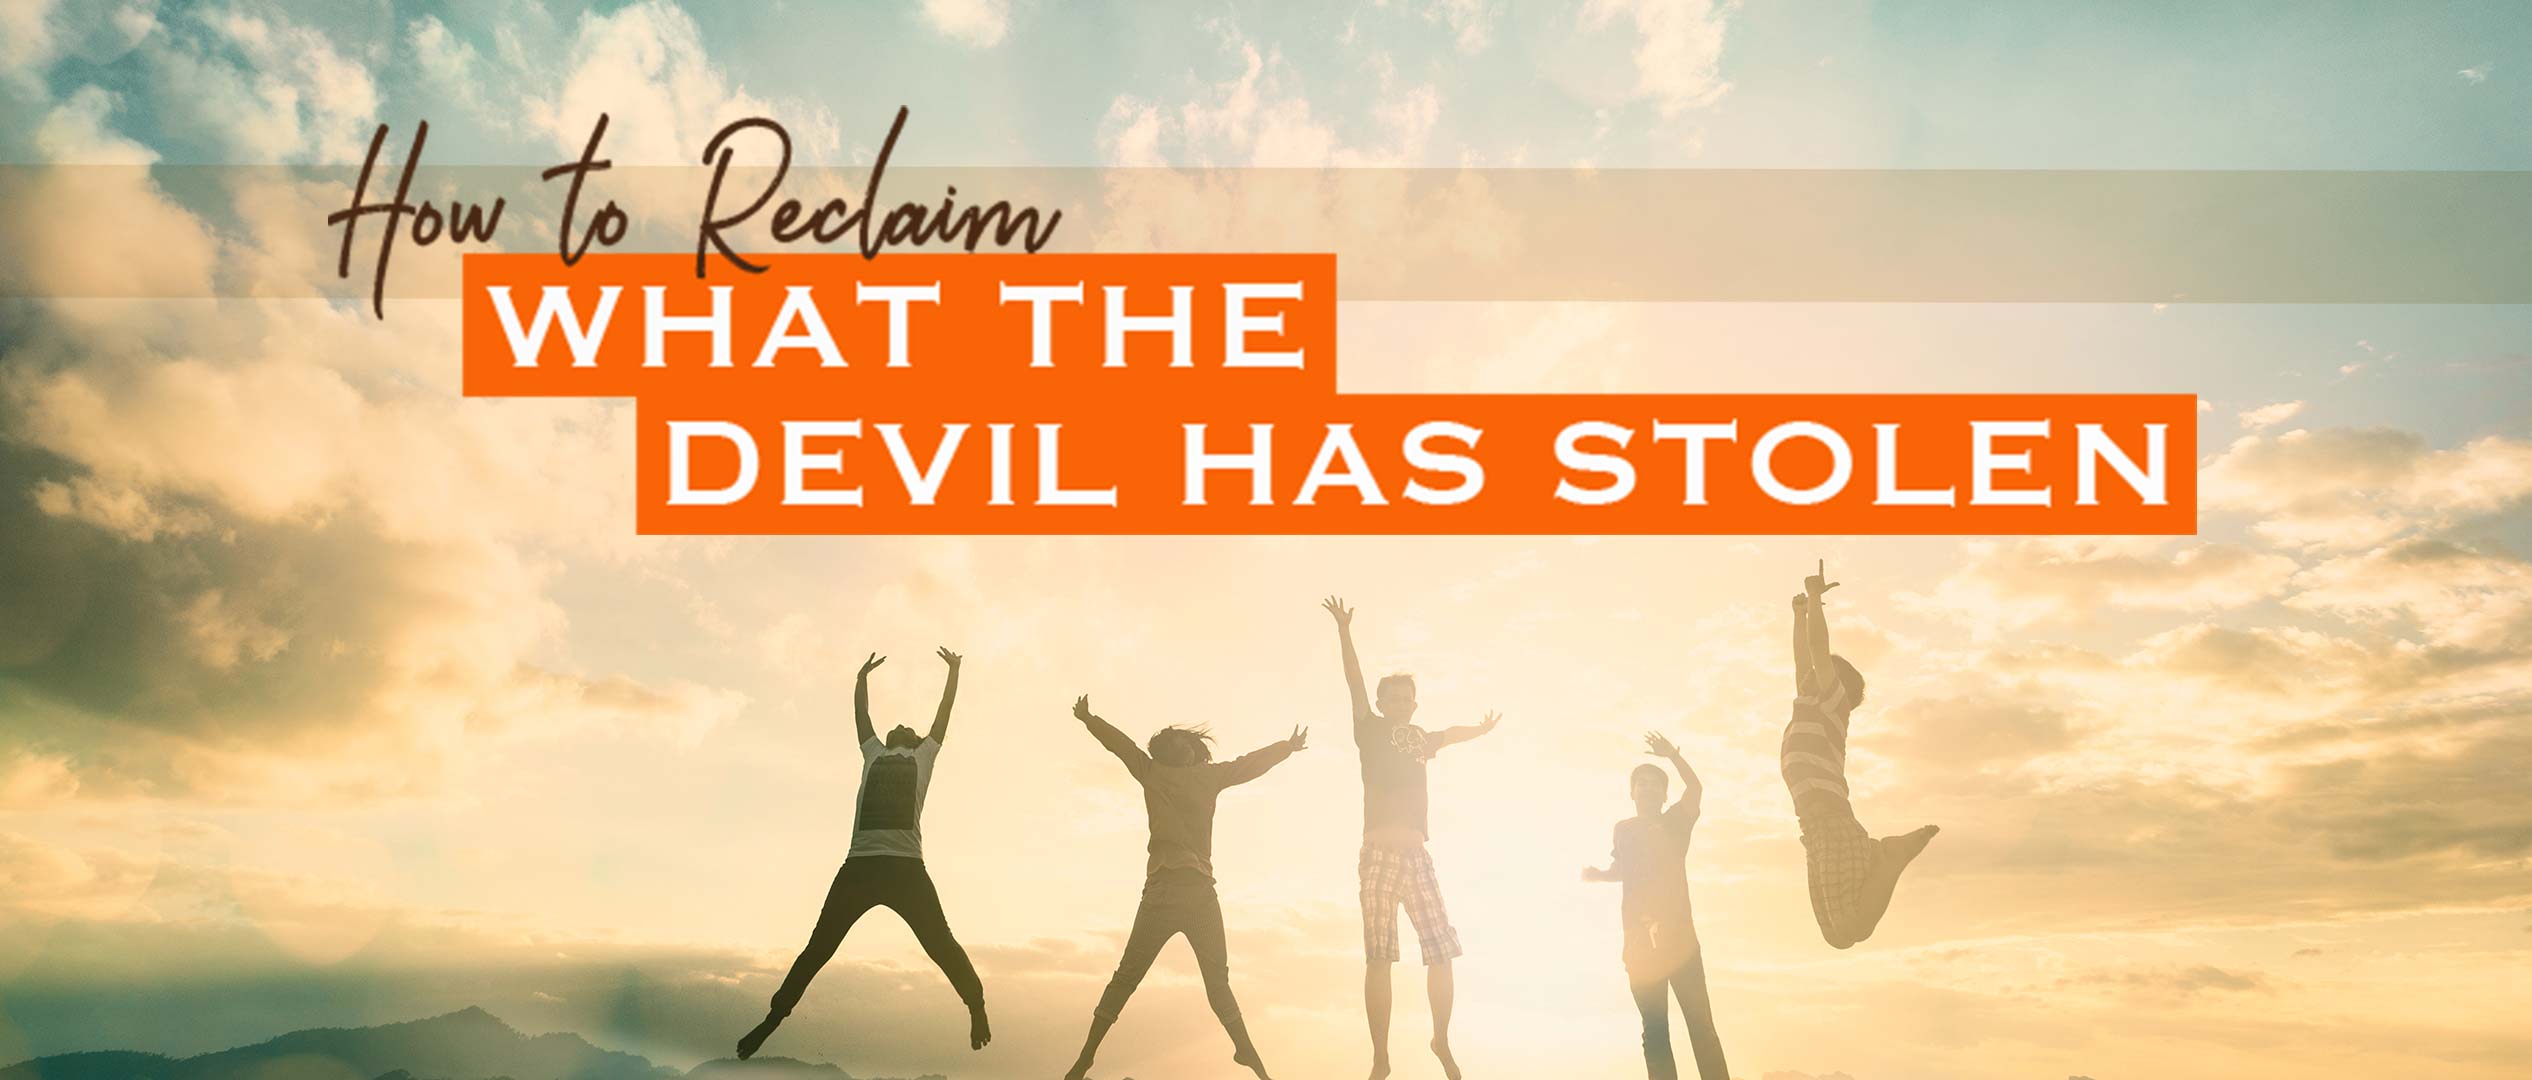 How To Reclaim What the Devil Has Stolen